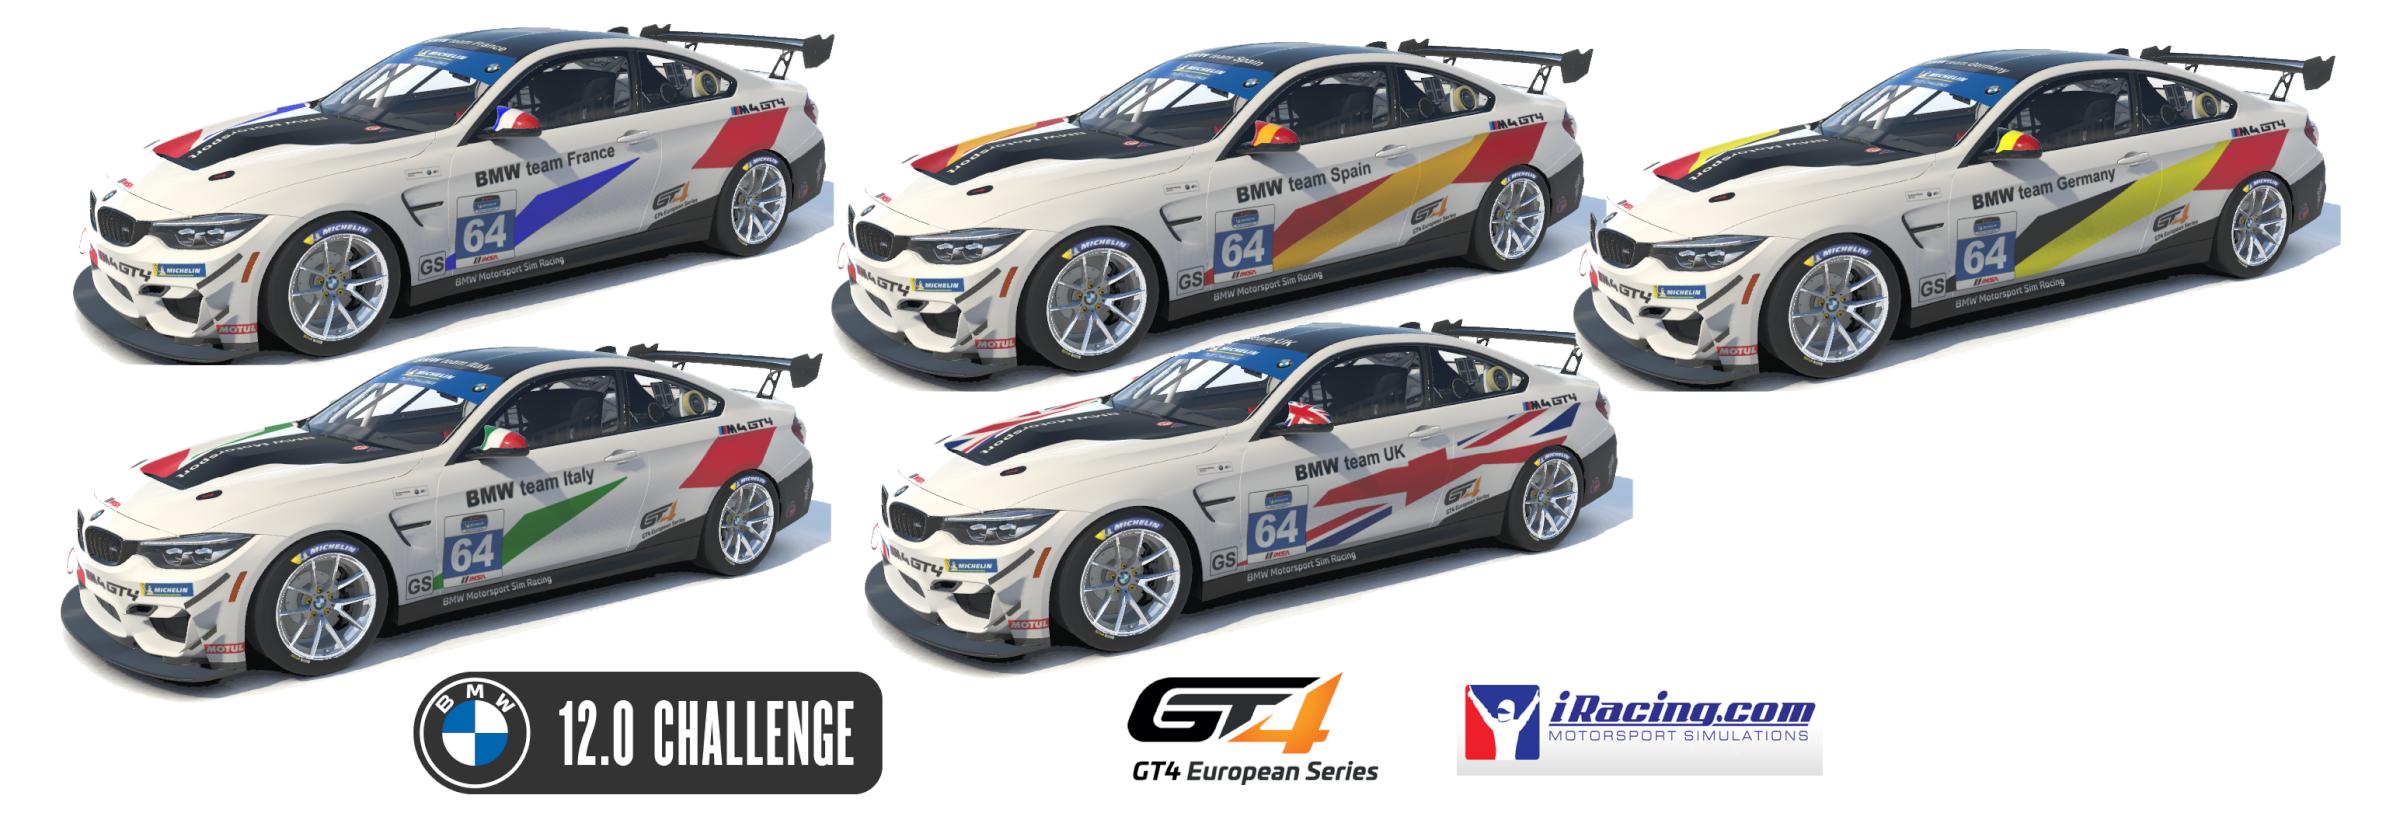 Preview of BMW M4 GT4 team France by Remigio DiPasqua